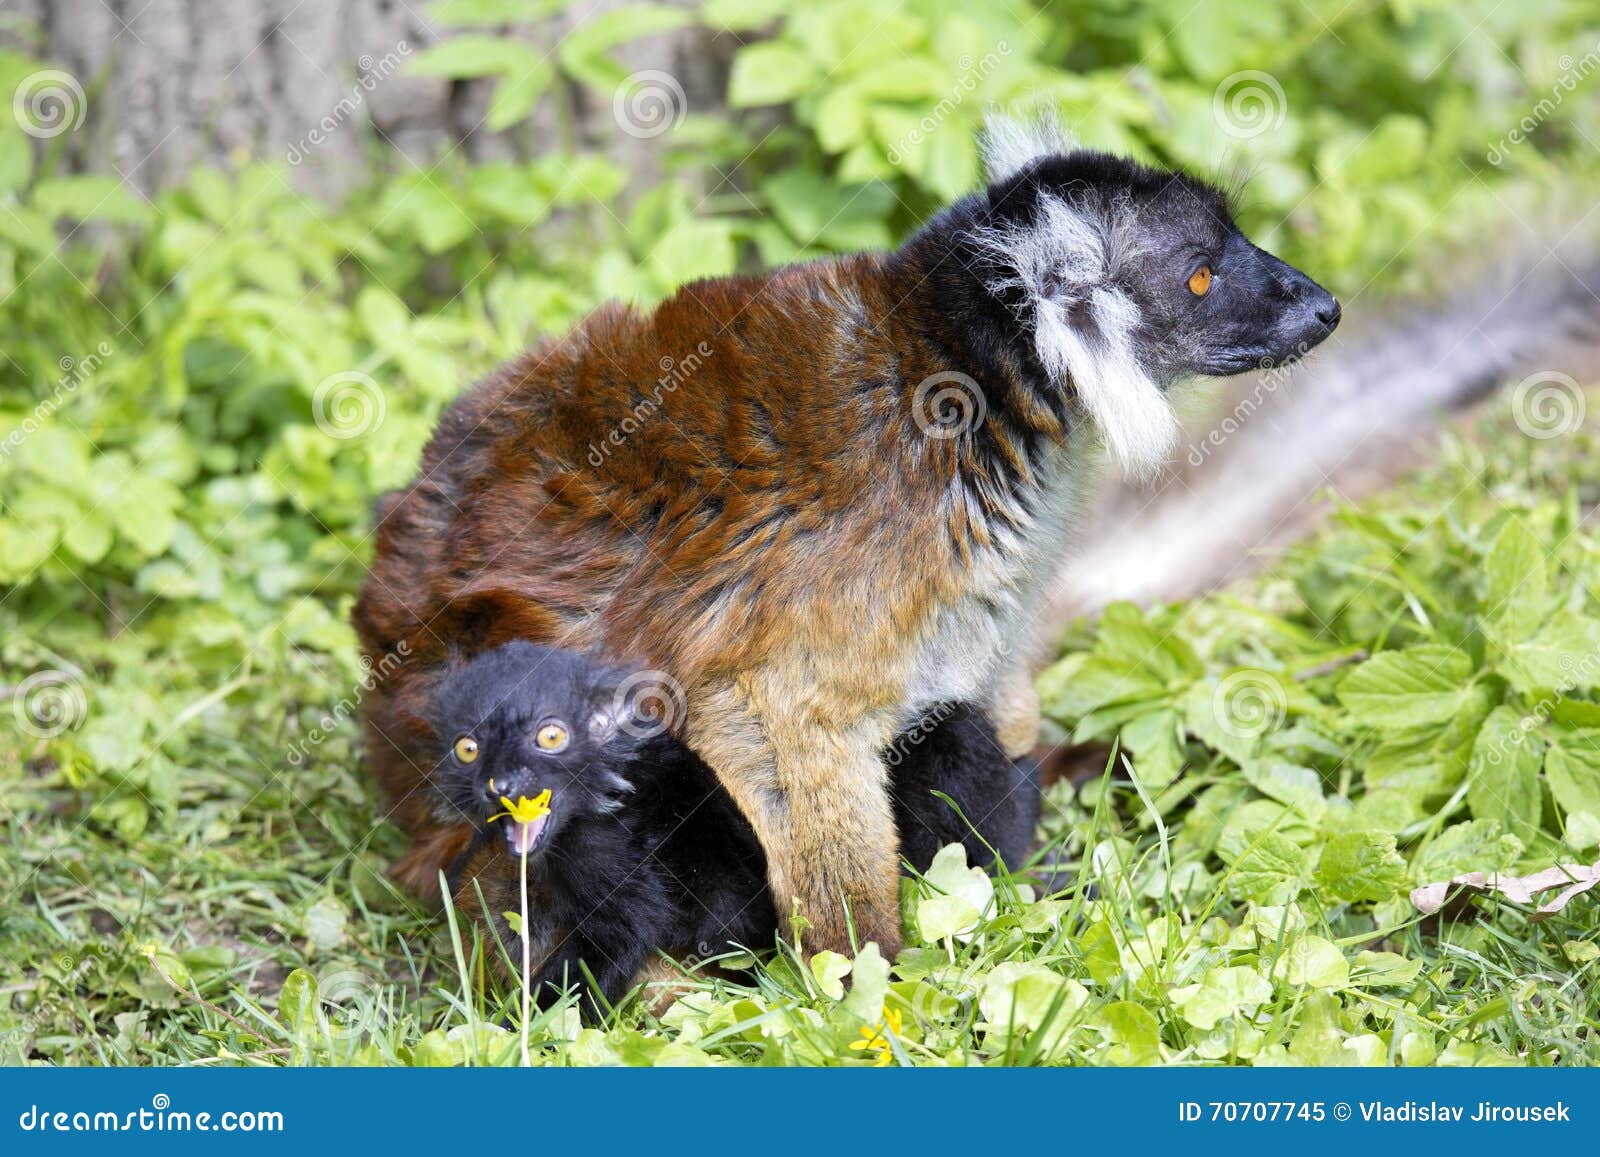 black lemur, eulemur m. macaco, female with young